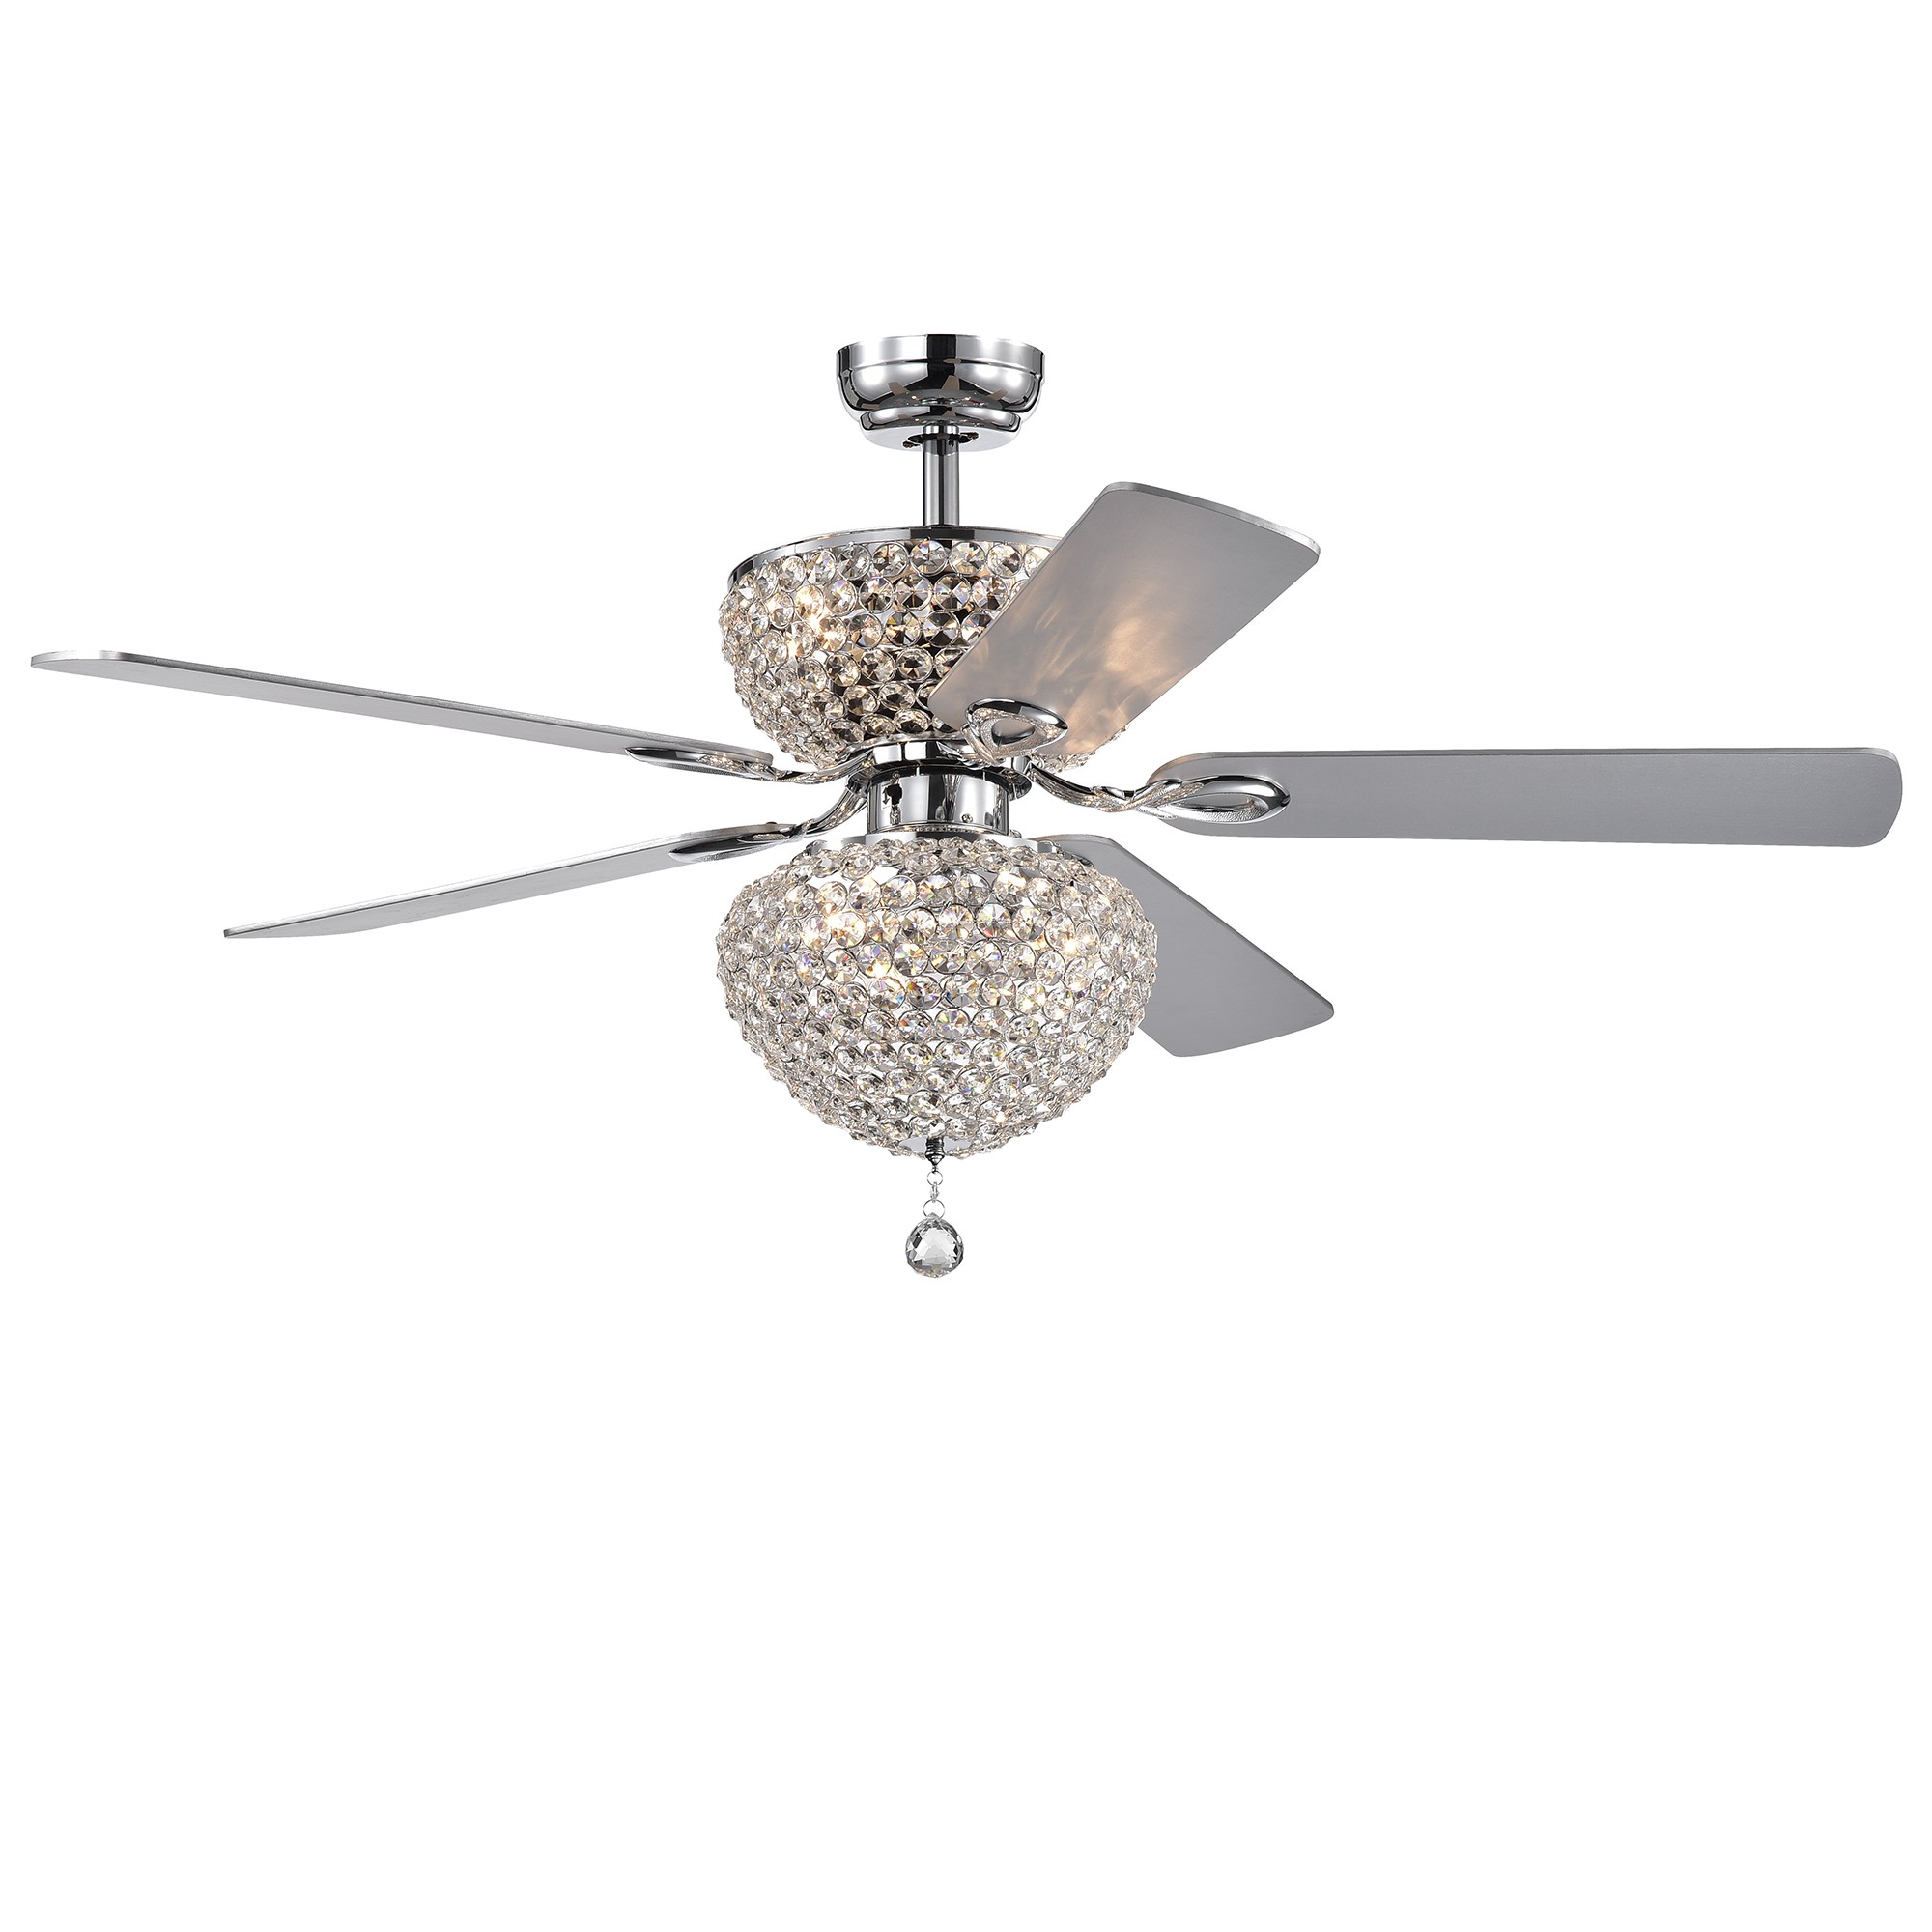 Swarana Chrome Dual Lighted Ceiling Fan with Crystal Shades (incl. Remote & 2 Color Option Blades)